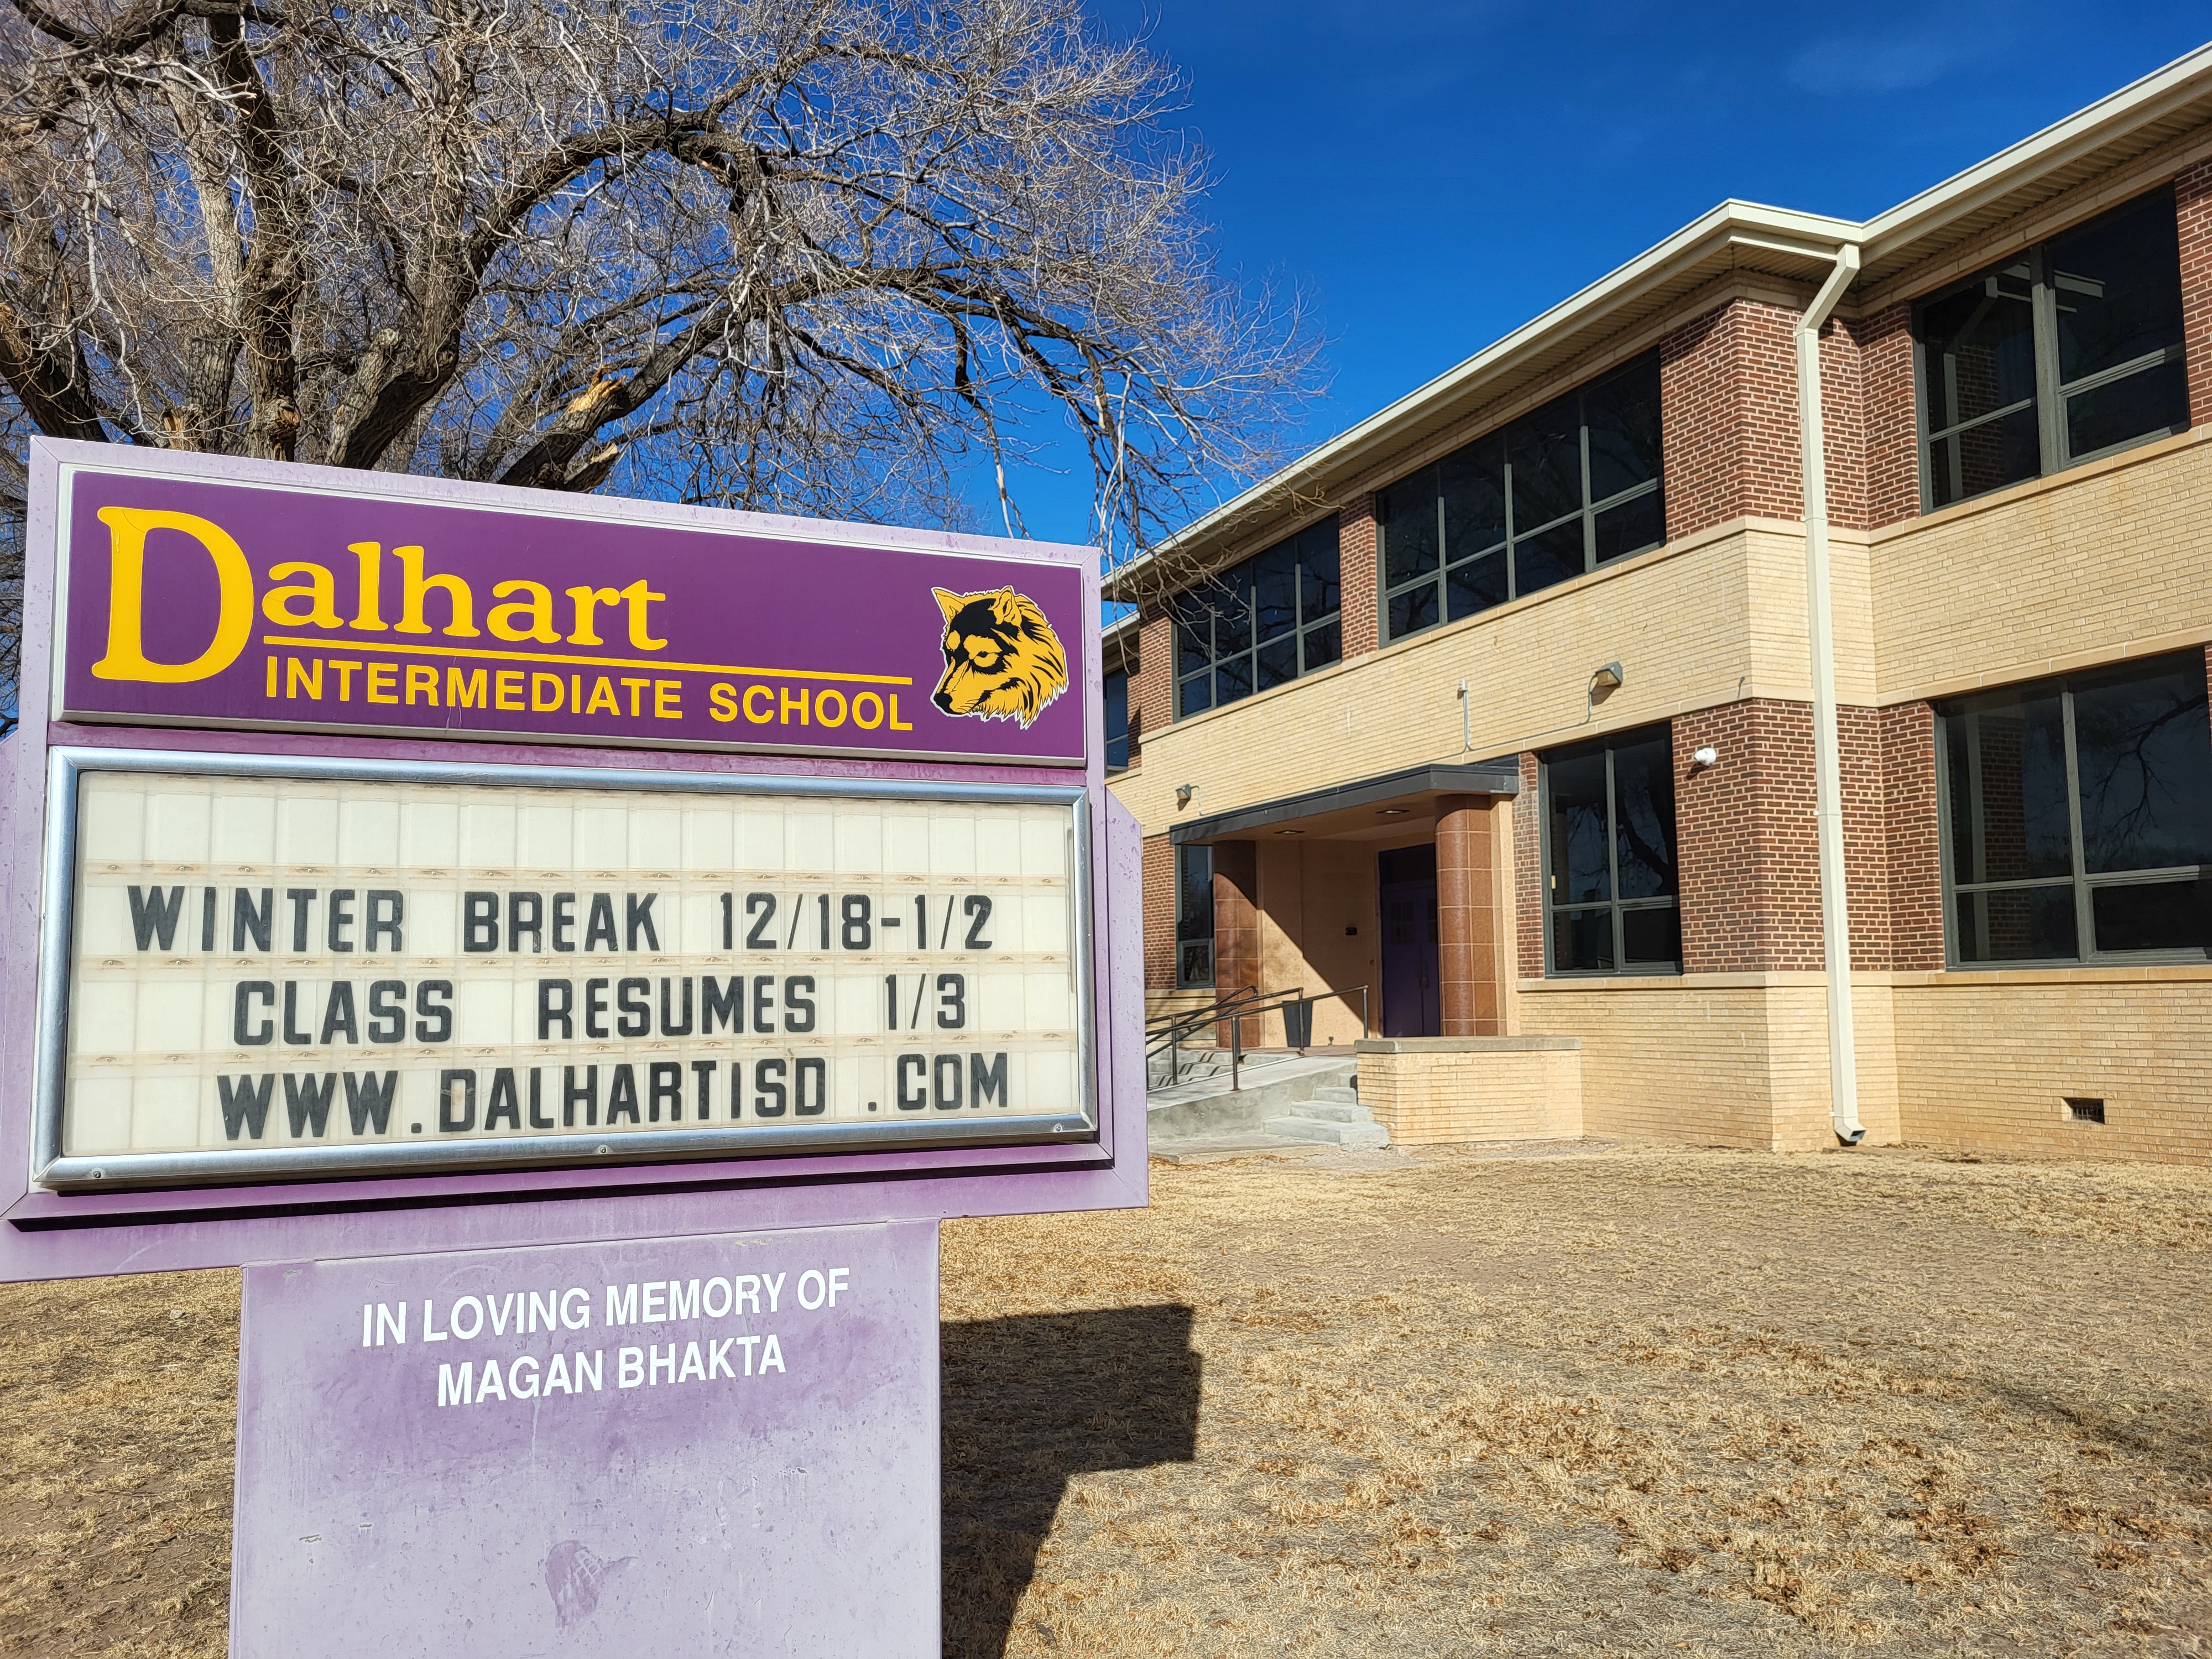 Photo of the message marquee and the front of the building at Dalhart Intermediate School.